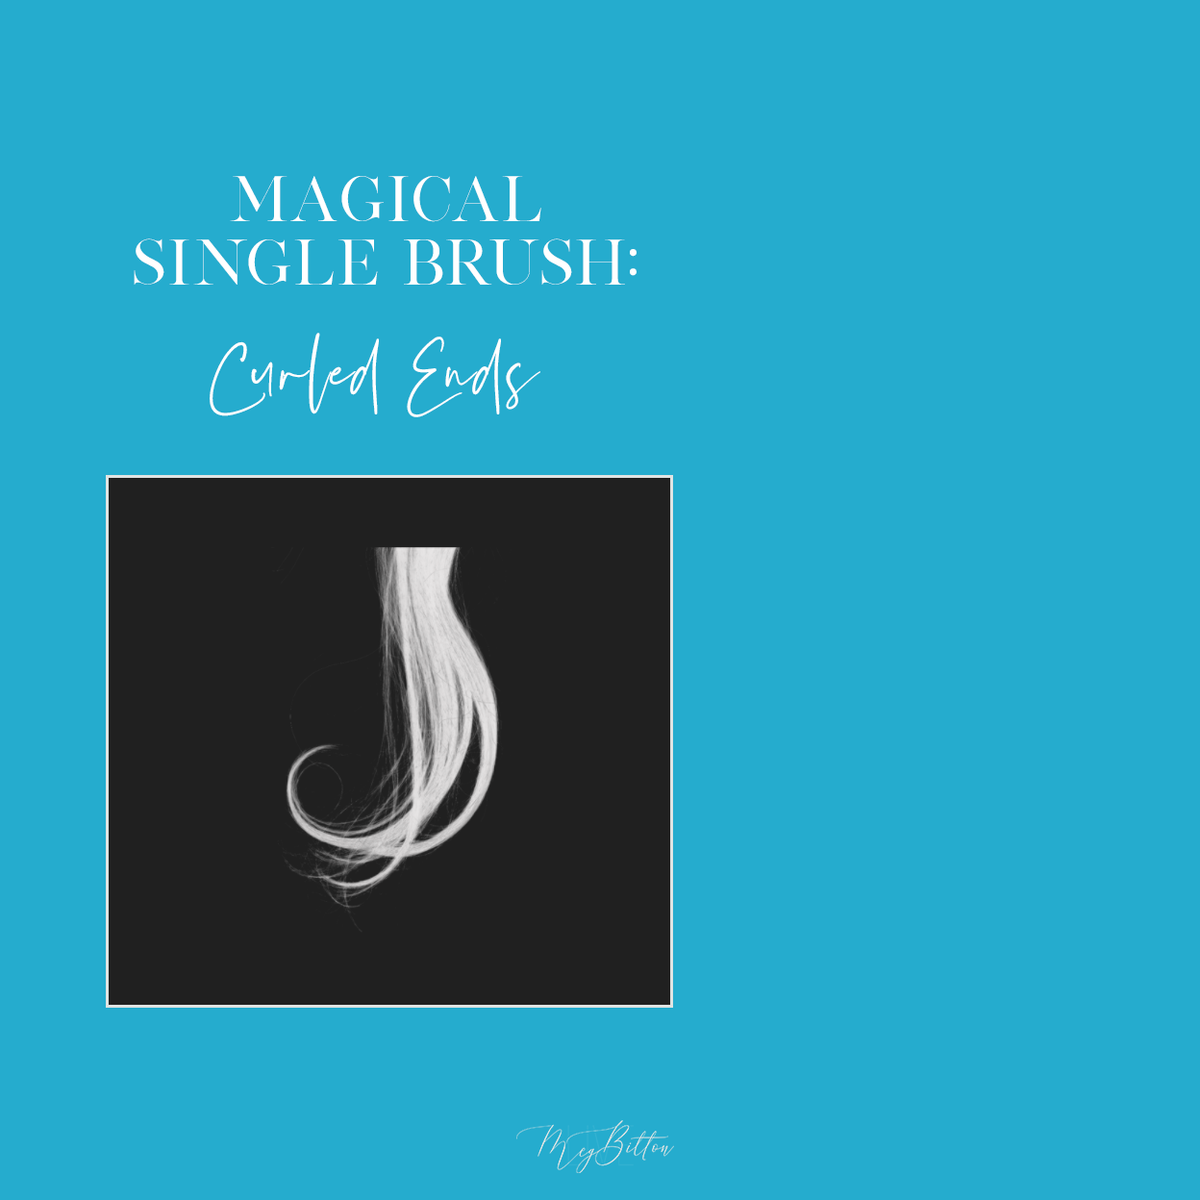 Magical Single Brush - Curled Ends - Meg Bitton Productions